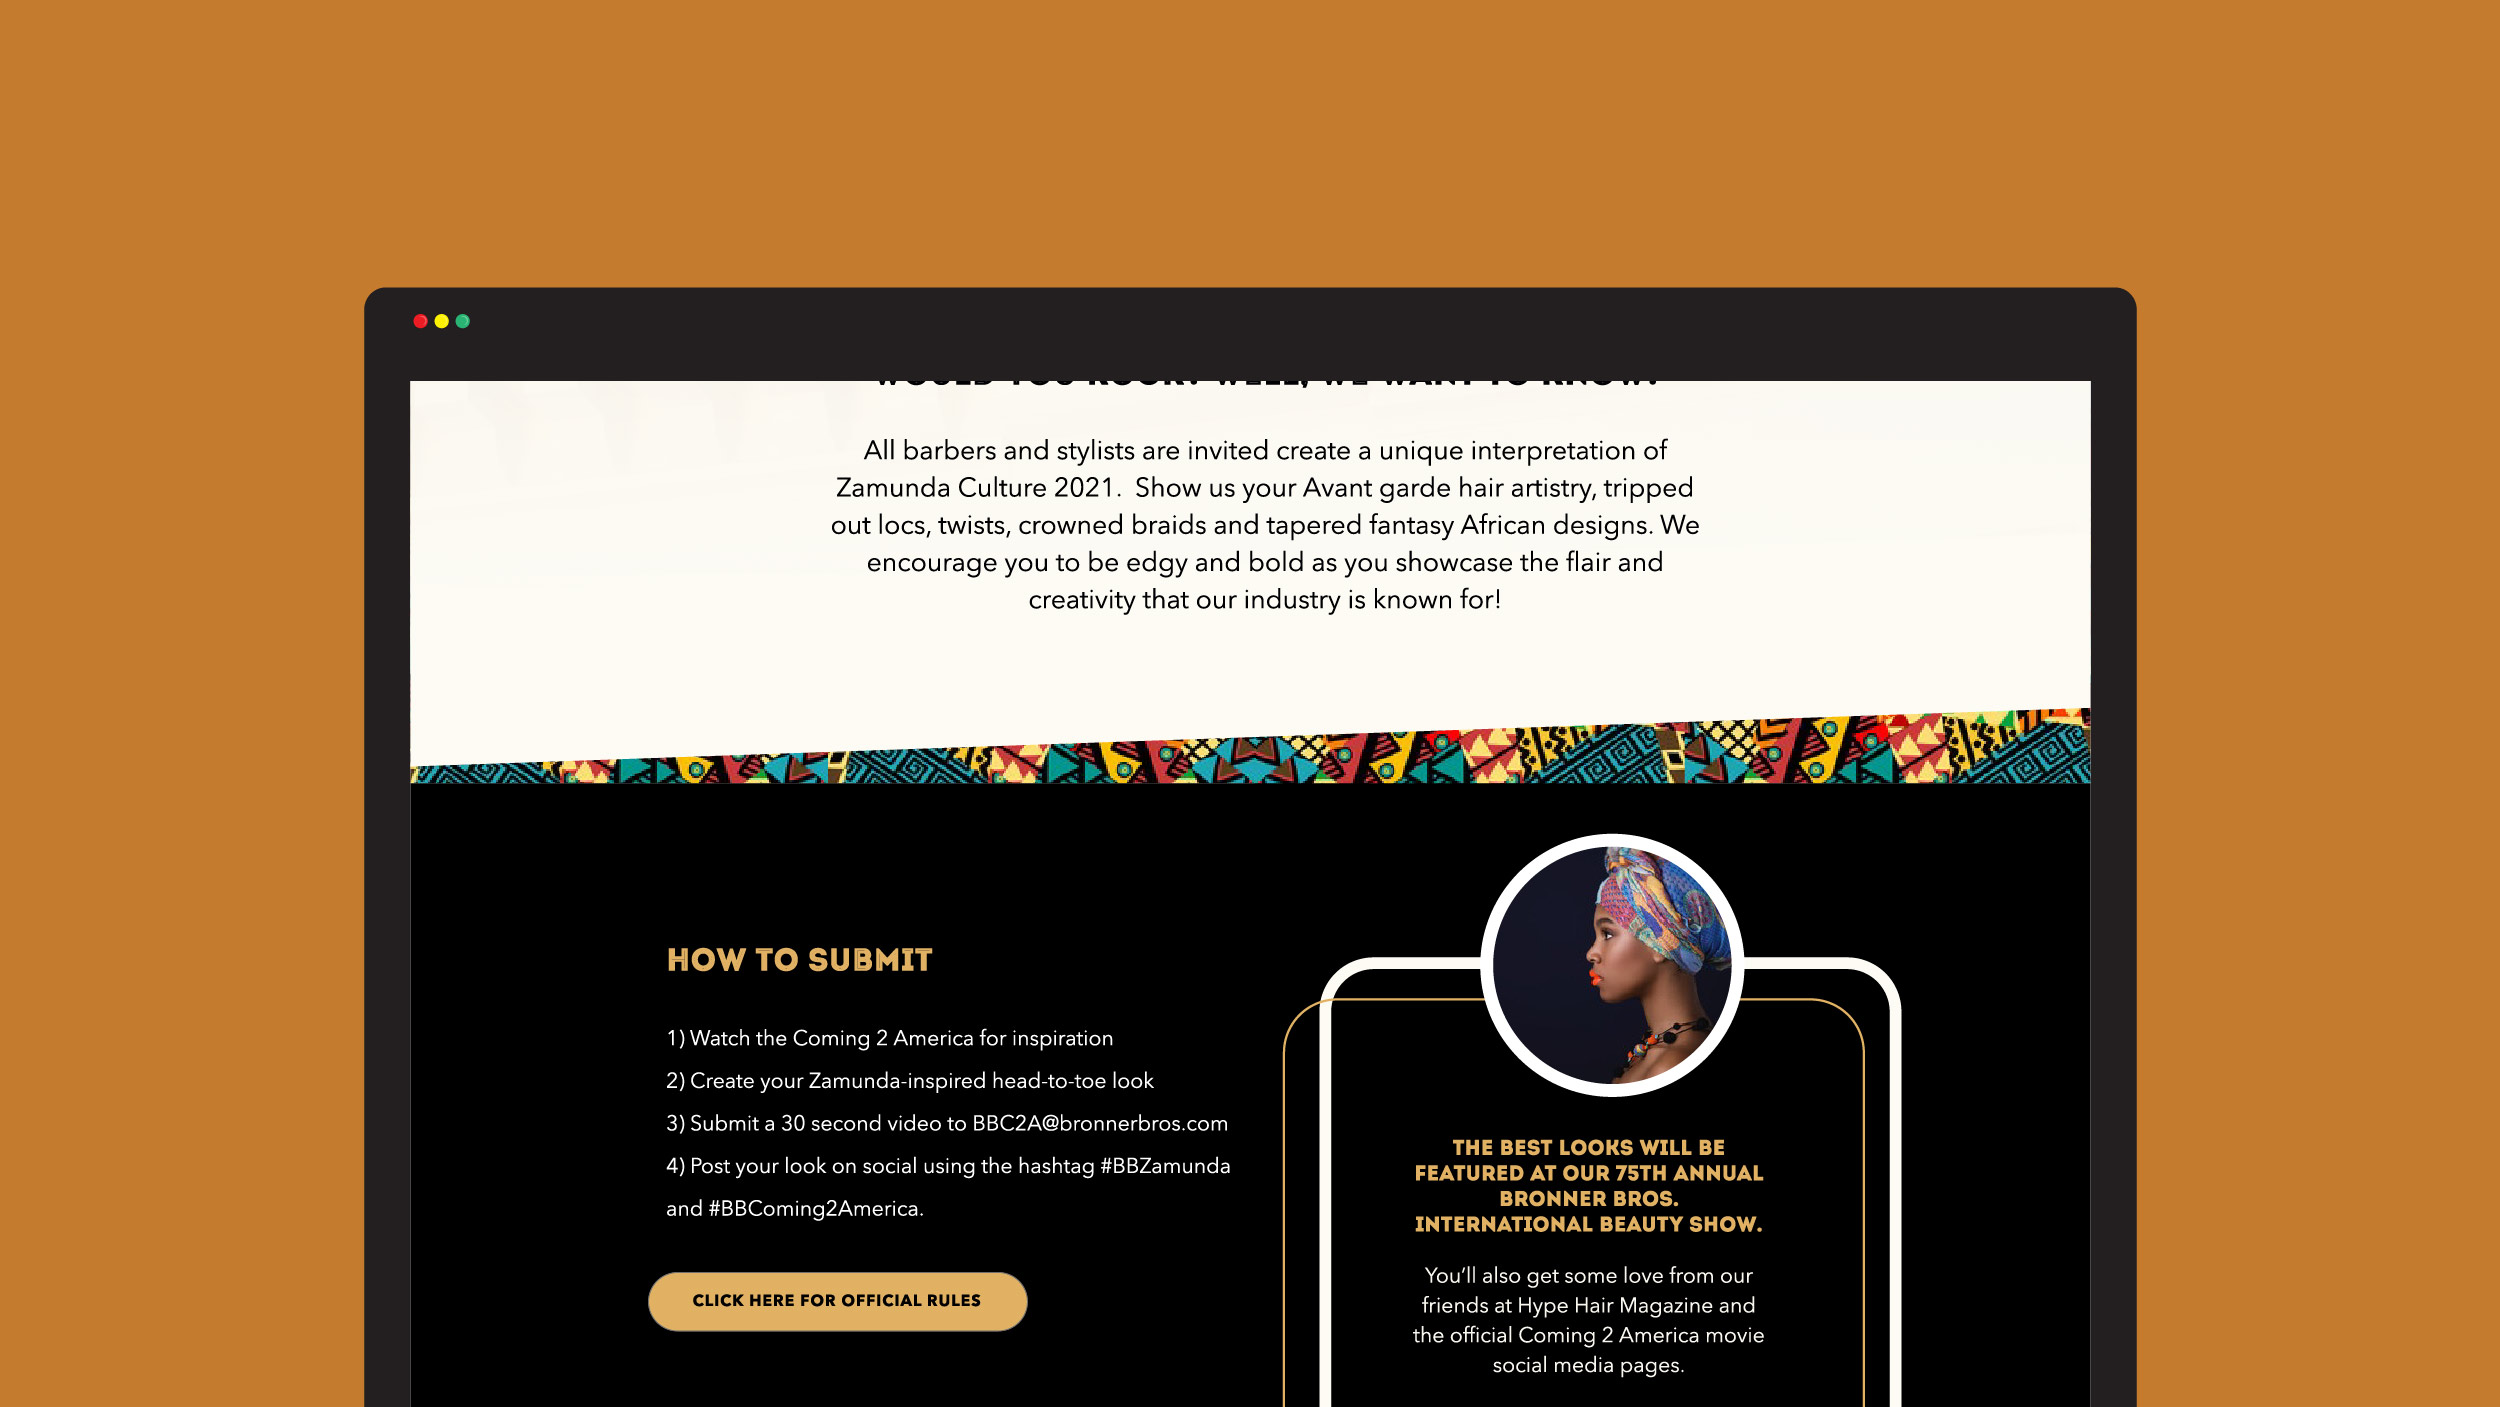 web design for Bronner Brothers Hair Contest, in Partnership with Amazon Studios for the Coming 2 America 2021 movie release